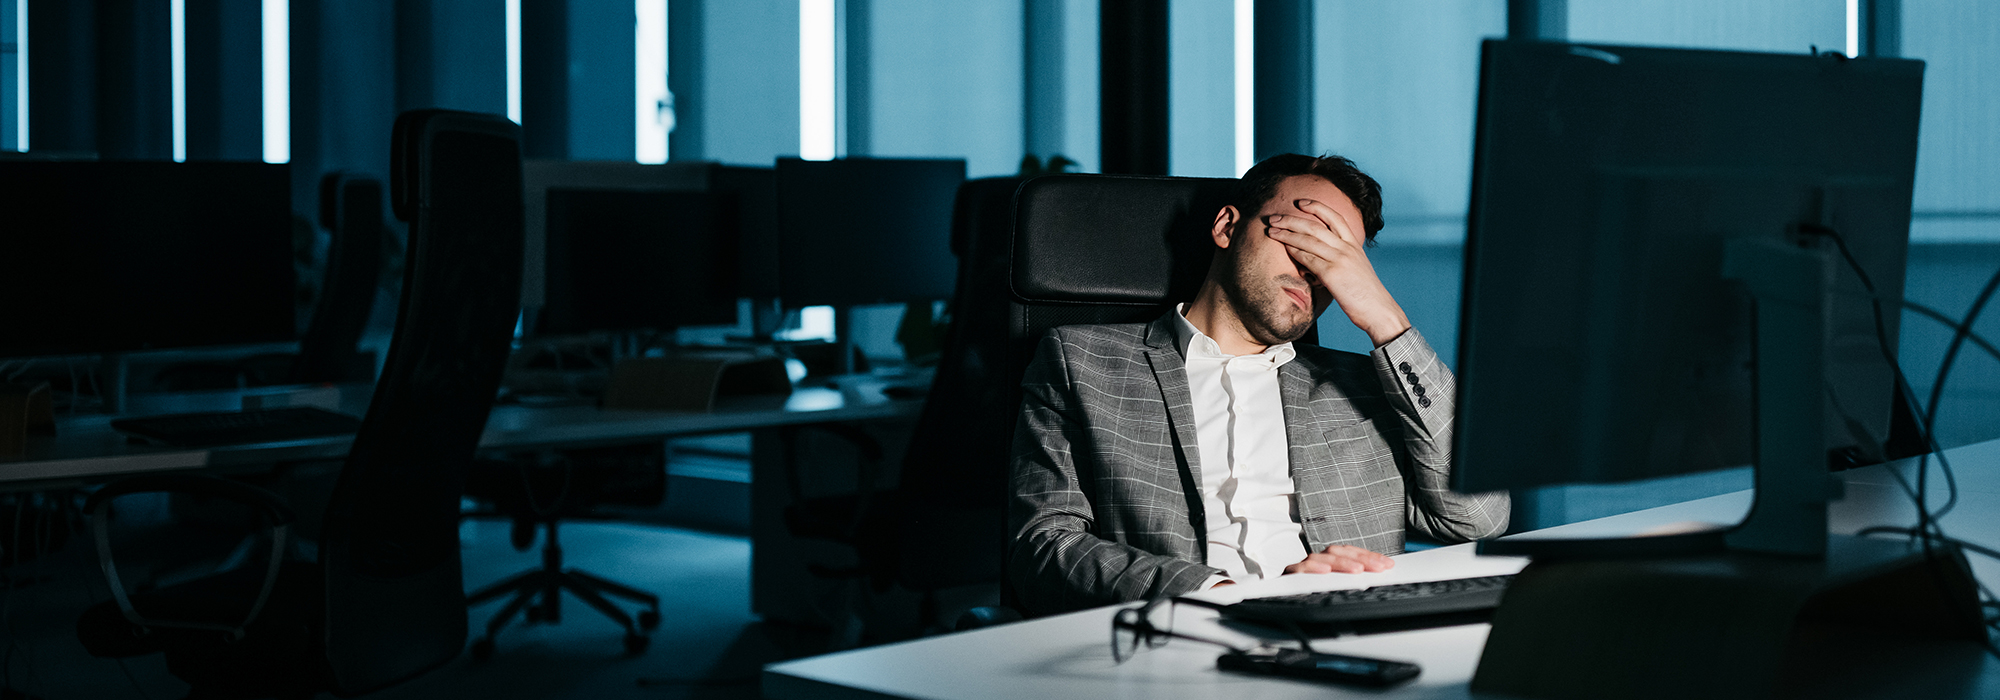 Want to Relieve Your Accounting and Finance Team's Workload Stress?